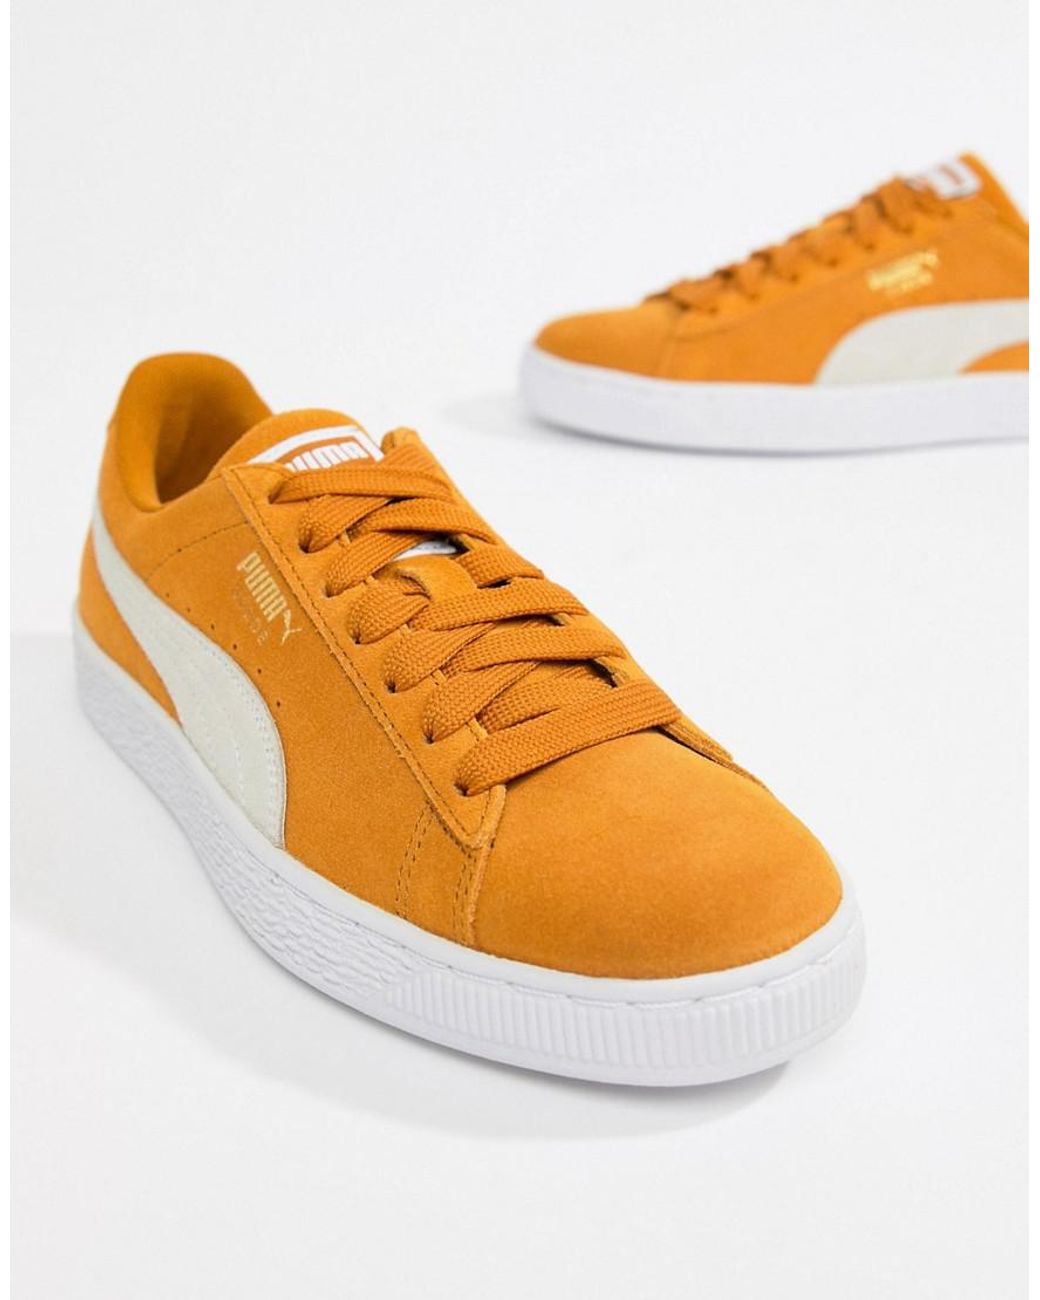 PUMA Suede Classic Mustard Yellow Sneakers | Lyst